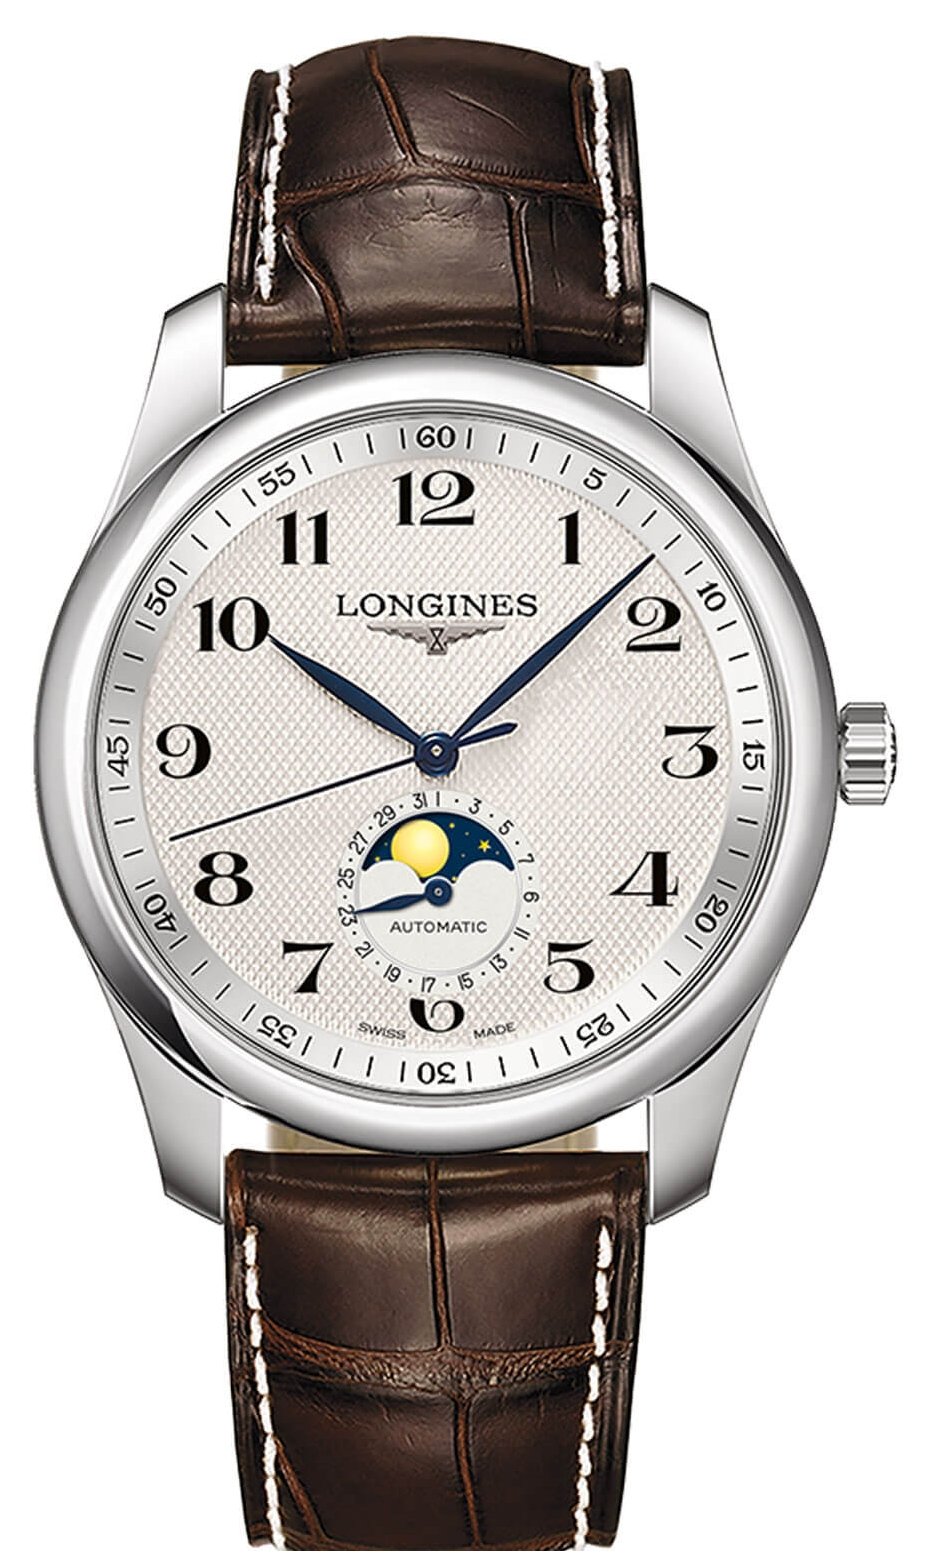 5 Things You Should Know Before Buying a Longines - First Class Watches Blog